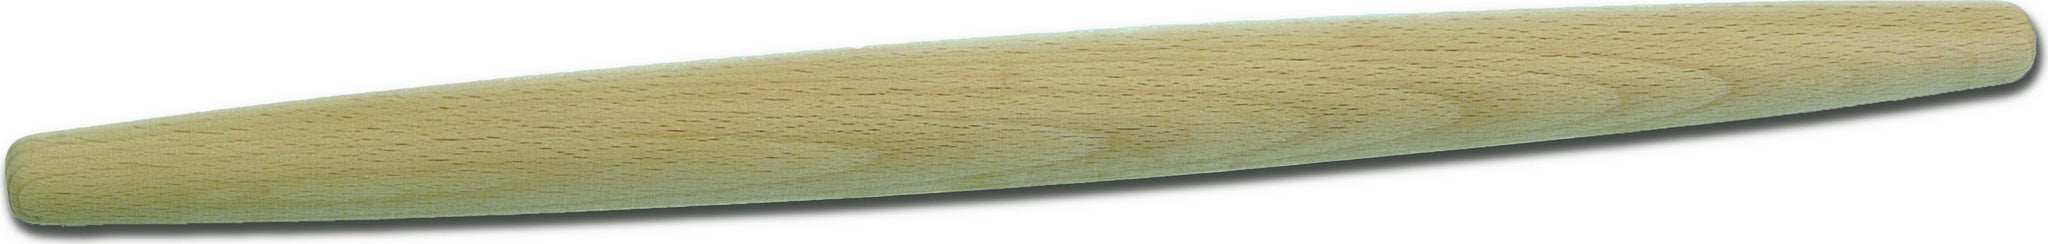 Berard - 20" x 2" Beechwood Tapered French Rolling Pin - 61653